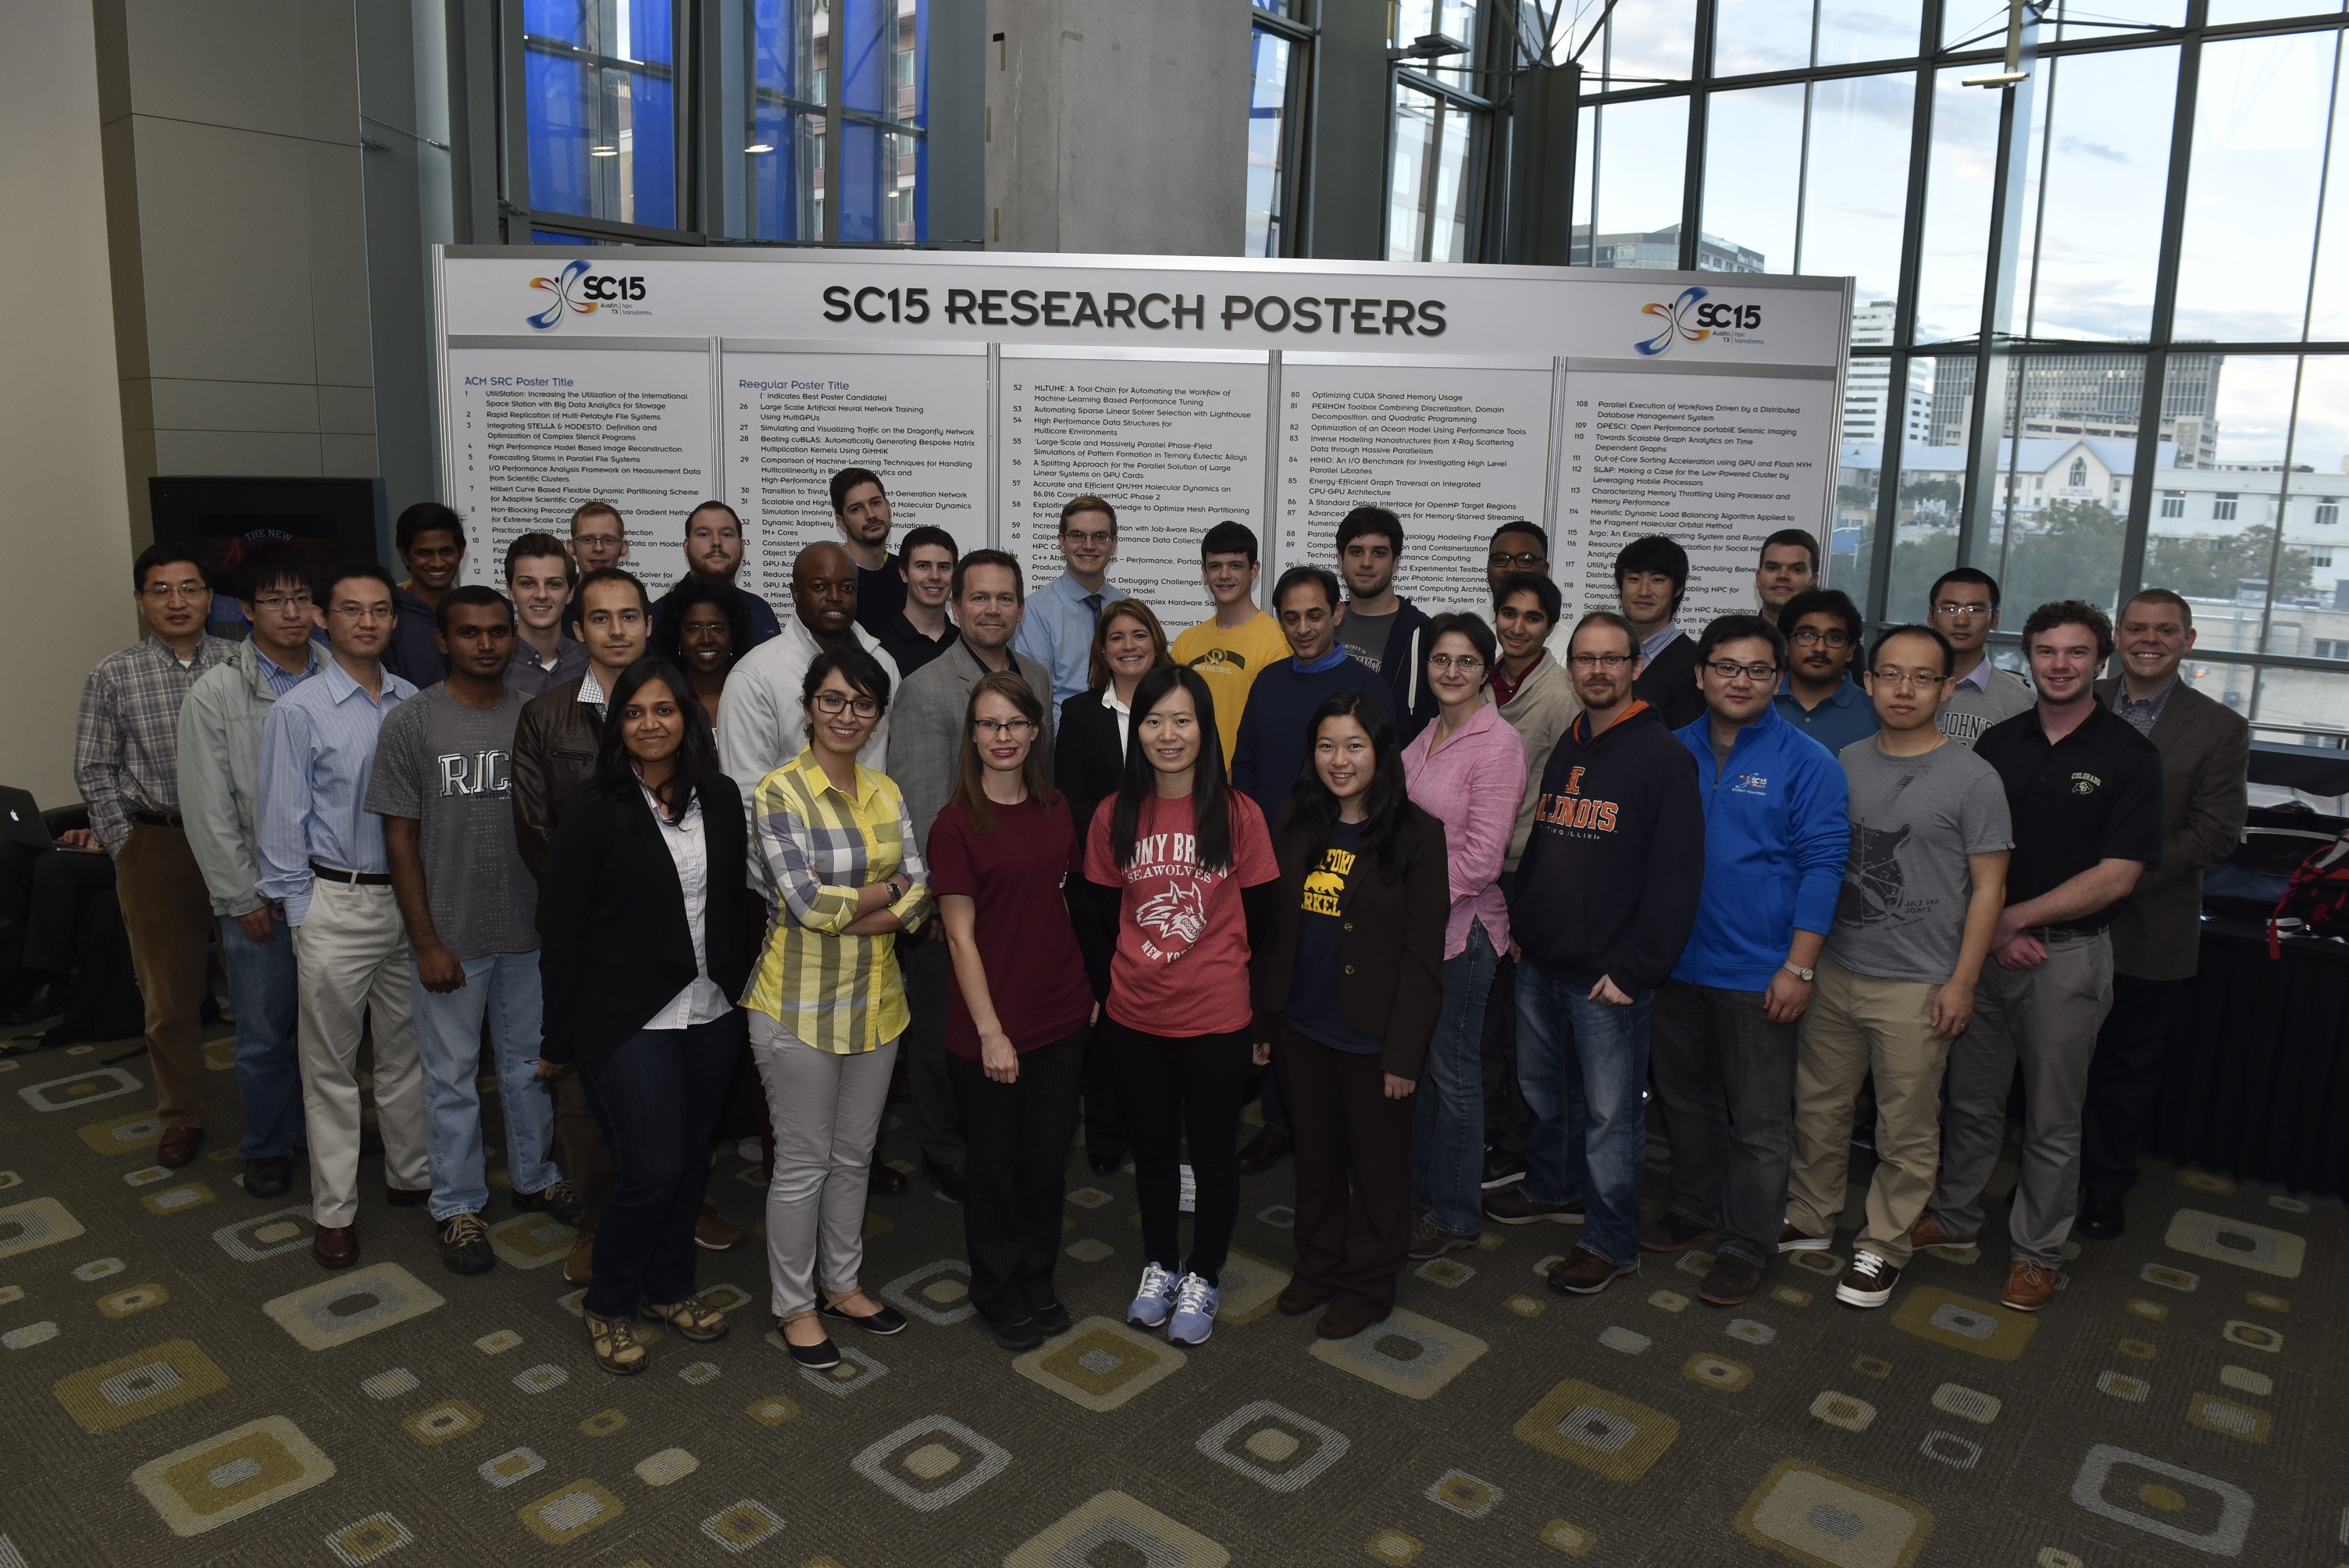 sc15_posters